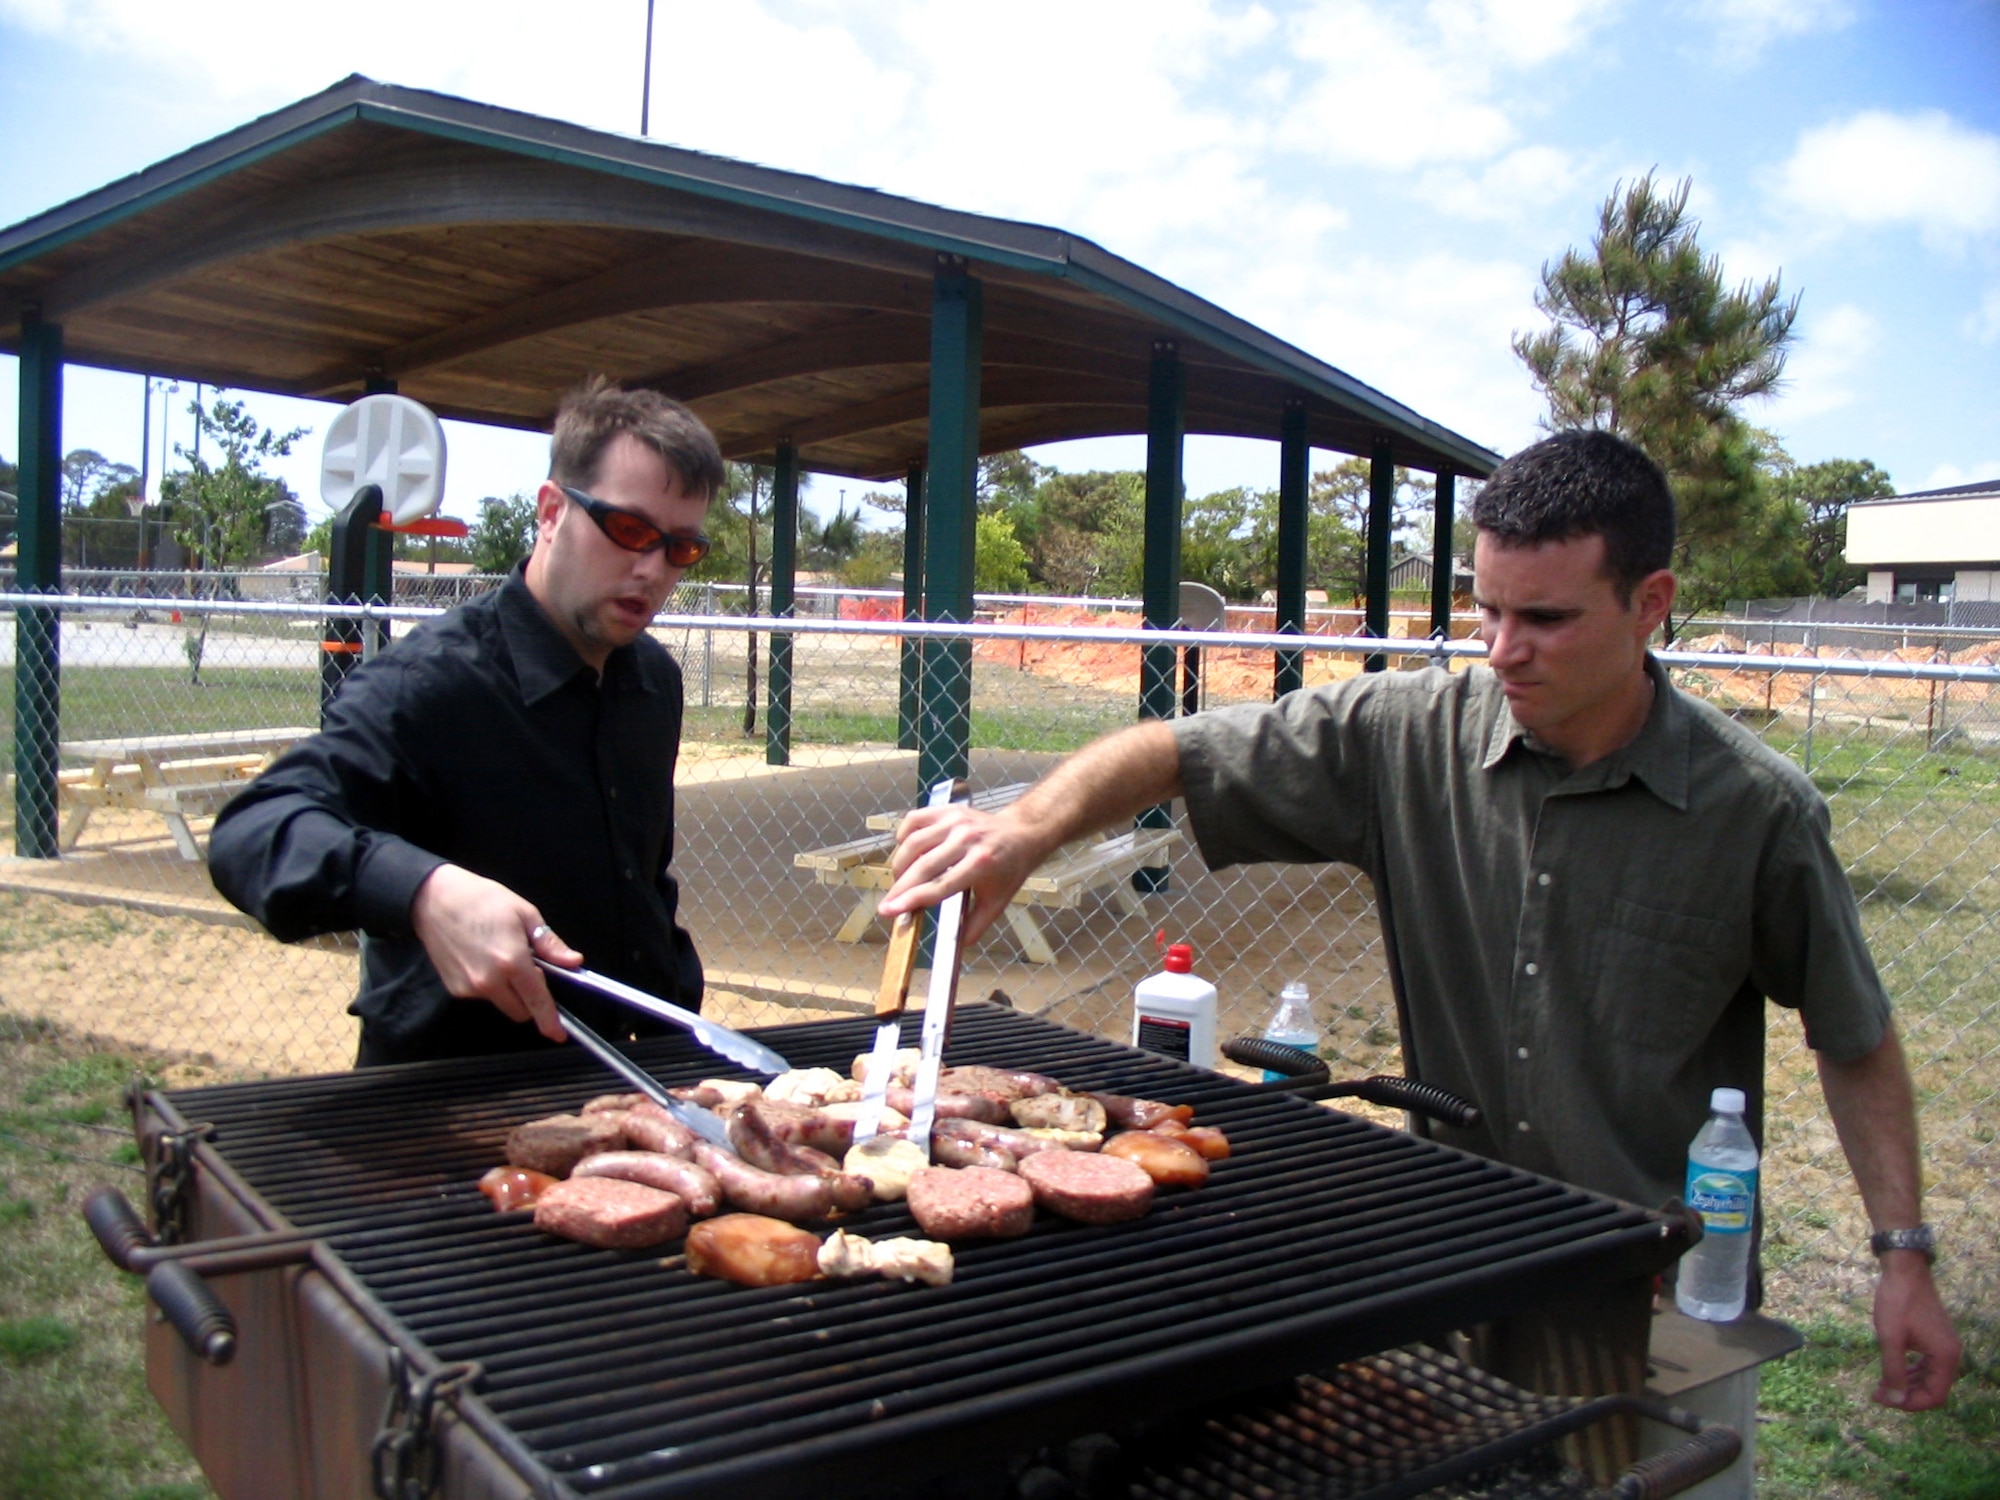 Members from the singles service man the grill after service. The Hurlburt Field Chapel singles group participates in a variety of events. (Courtesy Photographs)